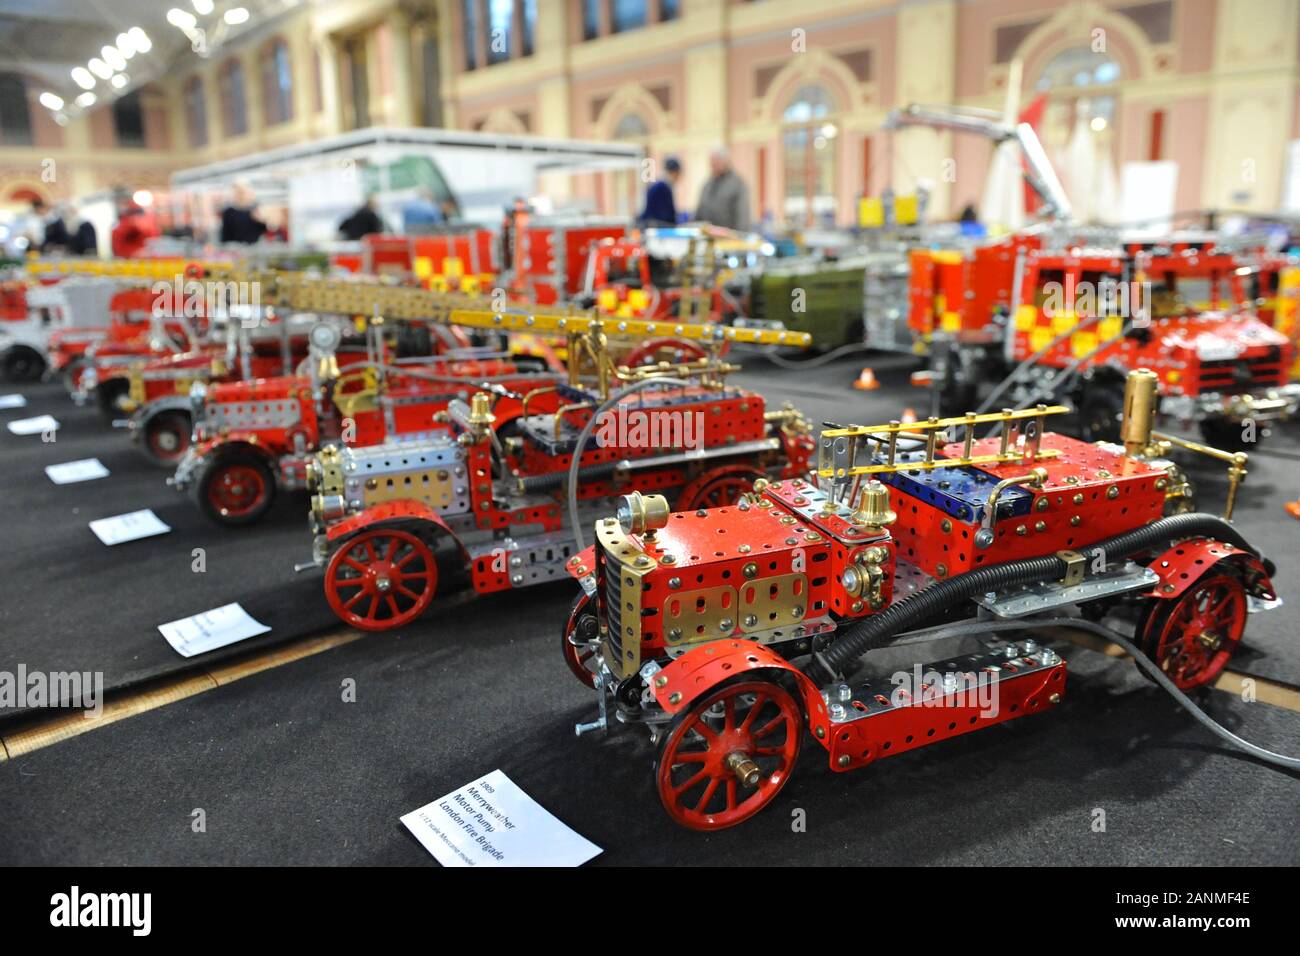 Meccano models on display on the opening day of the London Model Engineering Exhibition opened today at Alexandra Palace, London.  The models are part of the collection of Warwick District Councillor and retired chartered Mechanical Engineer George Illingworth who is displaying 30 of his hand-built large 1/12 scale Meccano Fire Engines from his 60+ magnificent collection.  The show is one of the largest modelling exhibitions in the UK, blending the full spectrum of model creation from traditional model engineering, steam locomotives and traction engines through to more modern gadgets and ‘boys Stock Photo